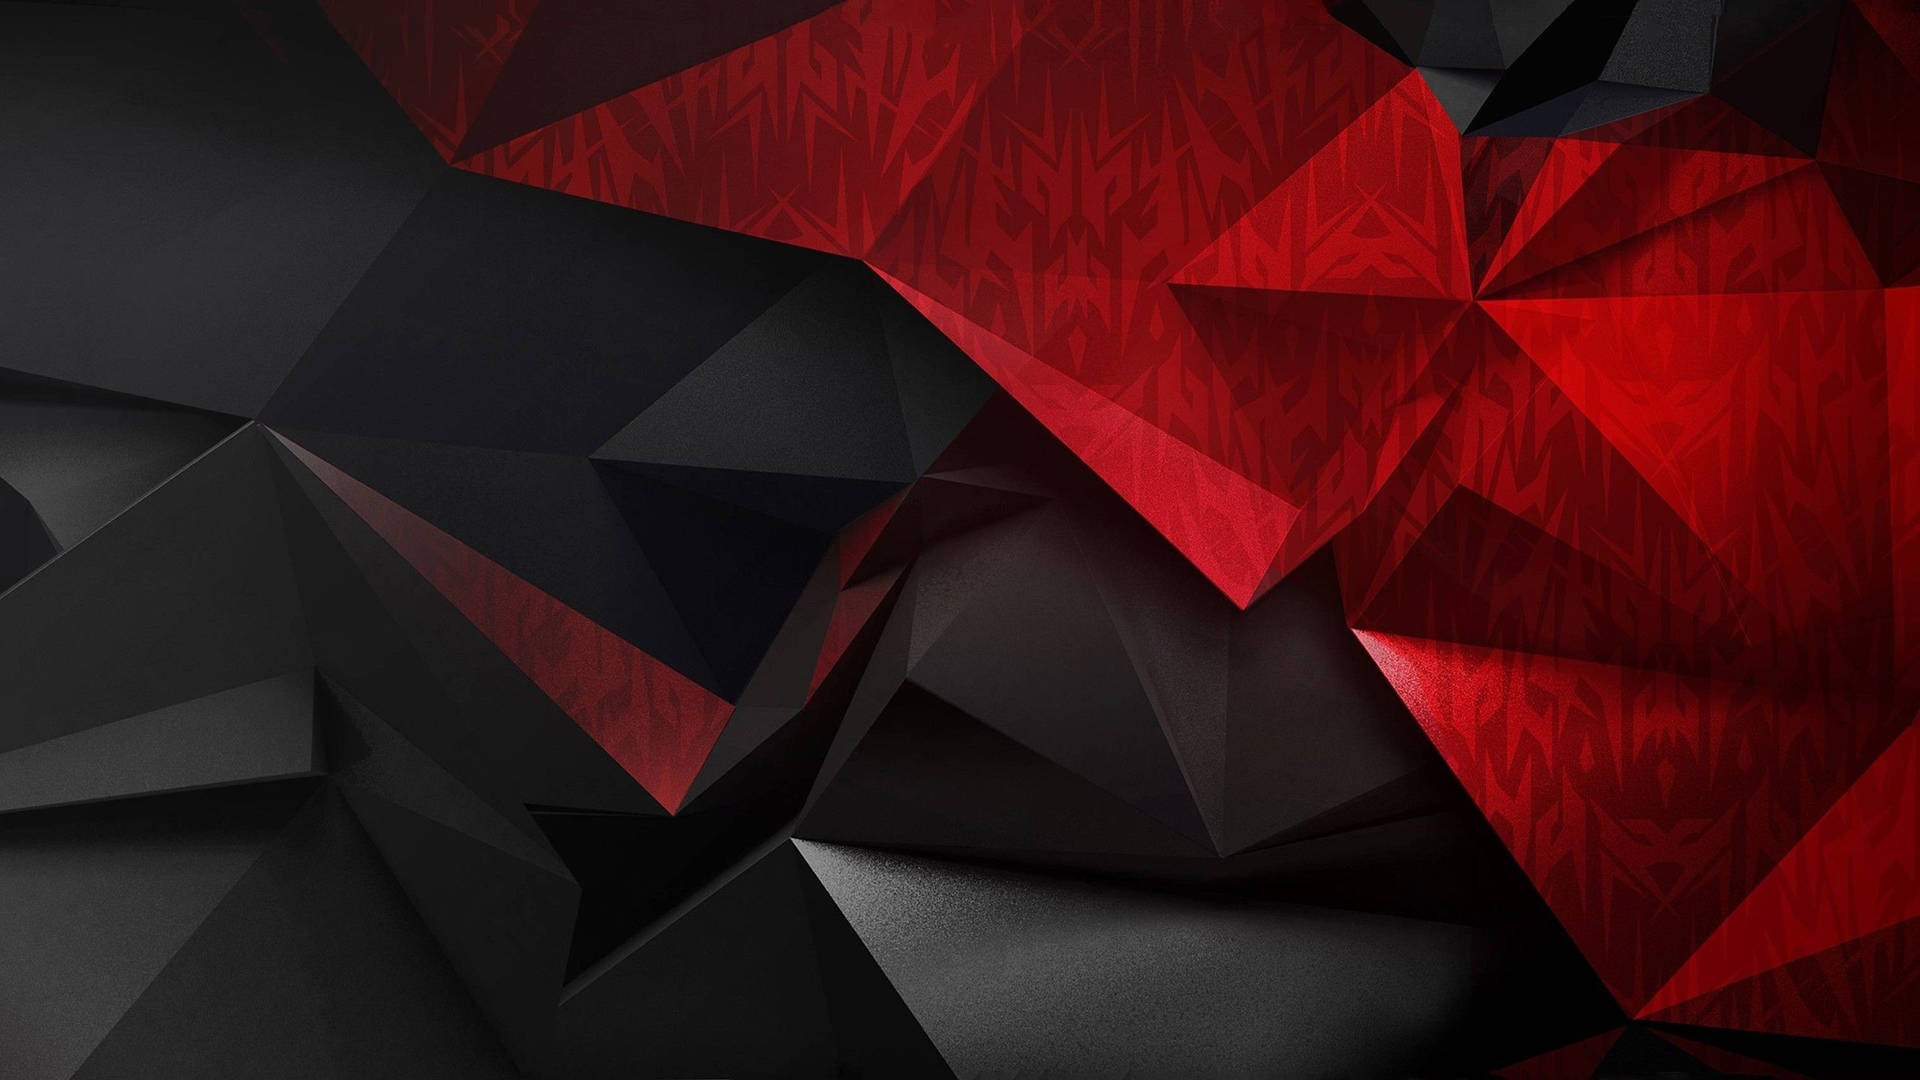 Black And Red Acer Predator Geometric Picture